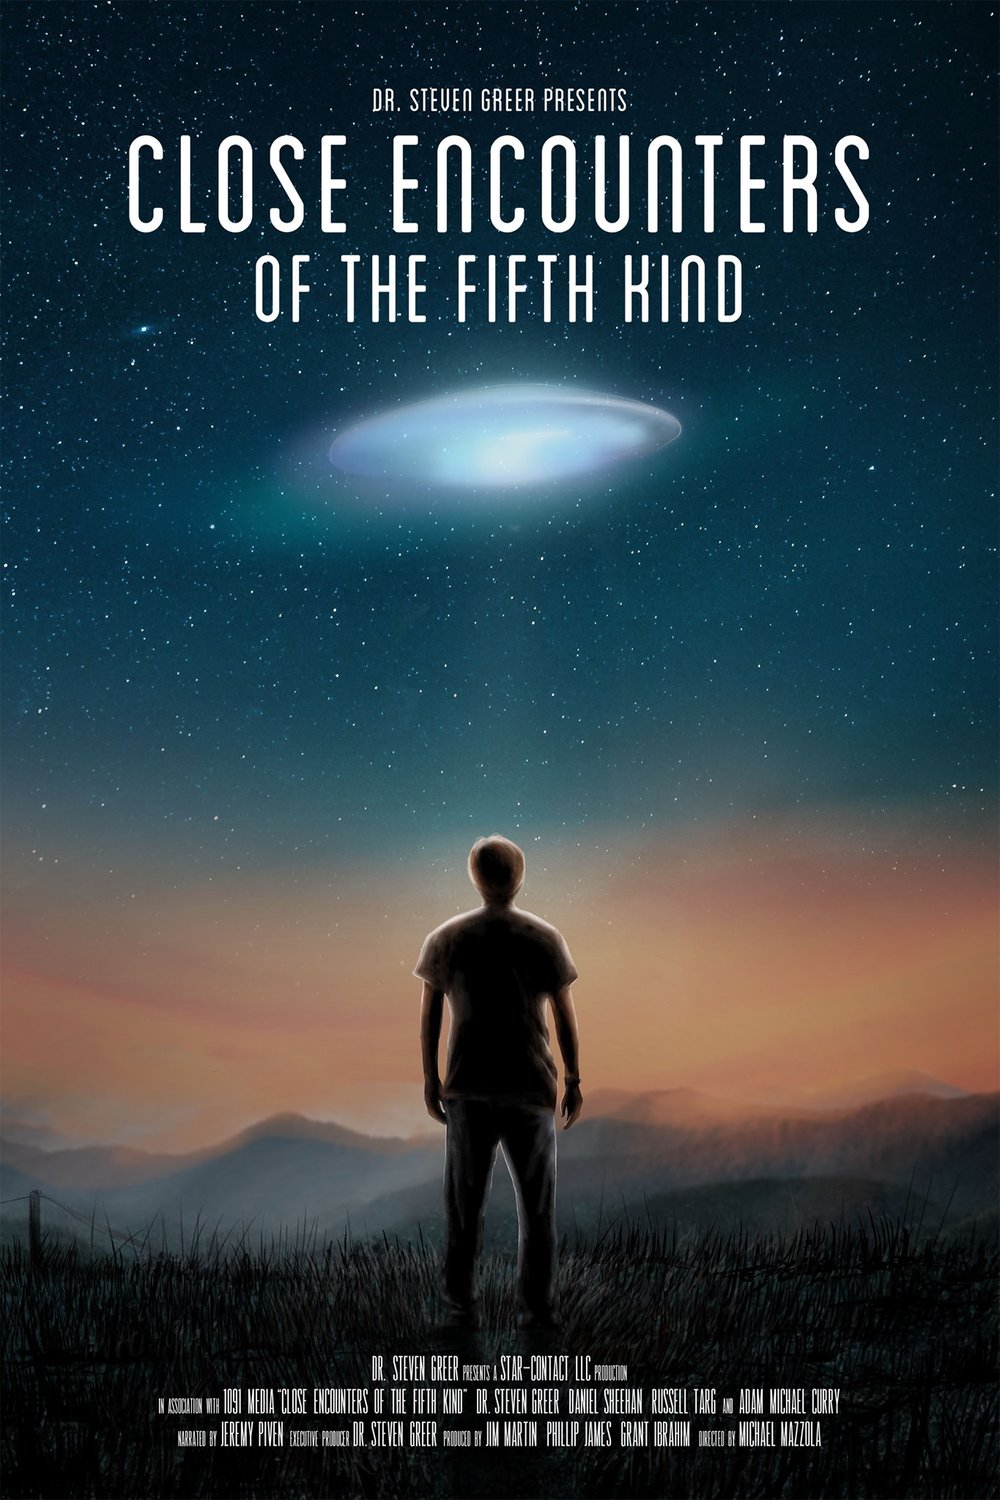 Poster of the movie Close Encounters of the Fifth Kind